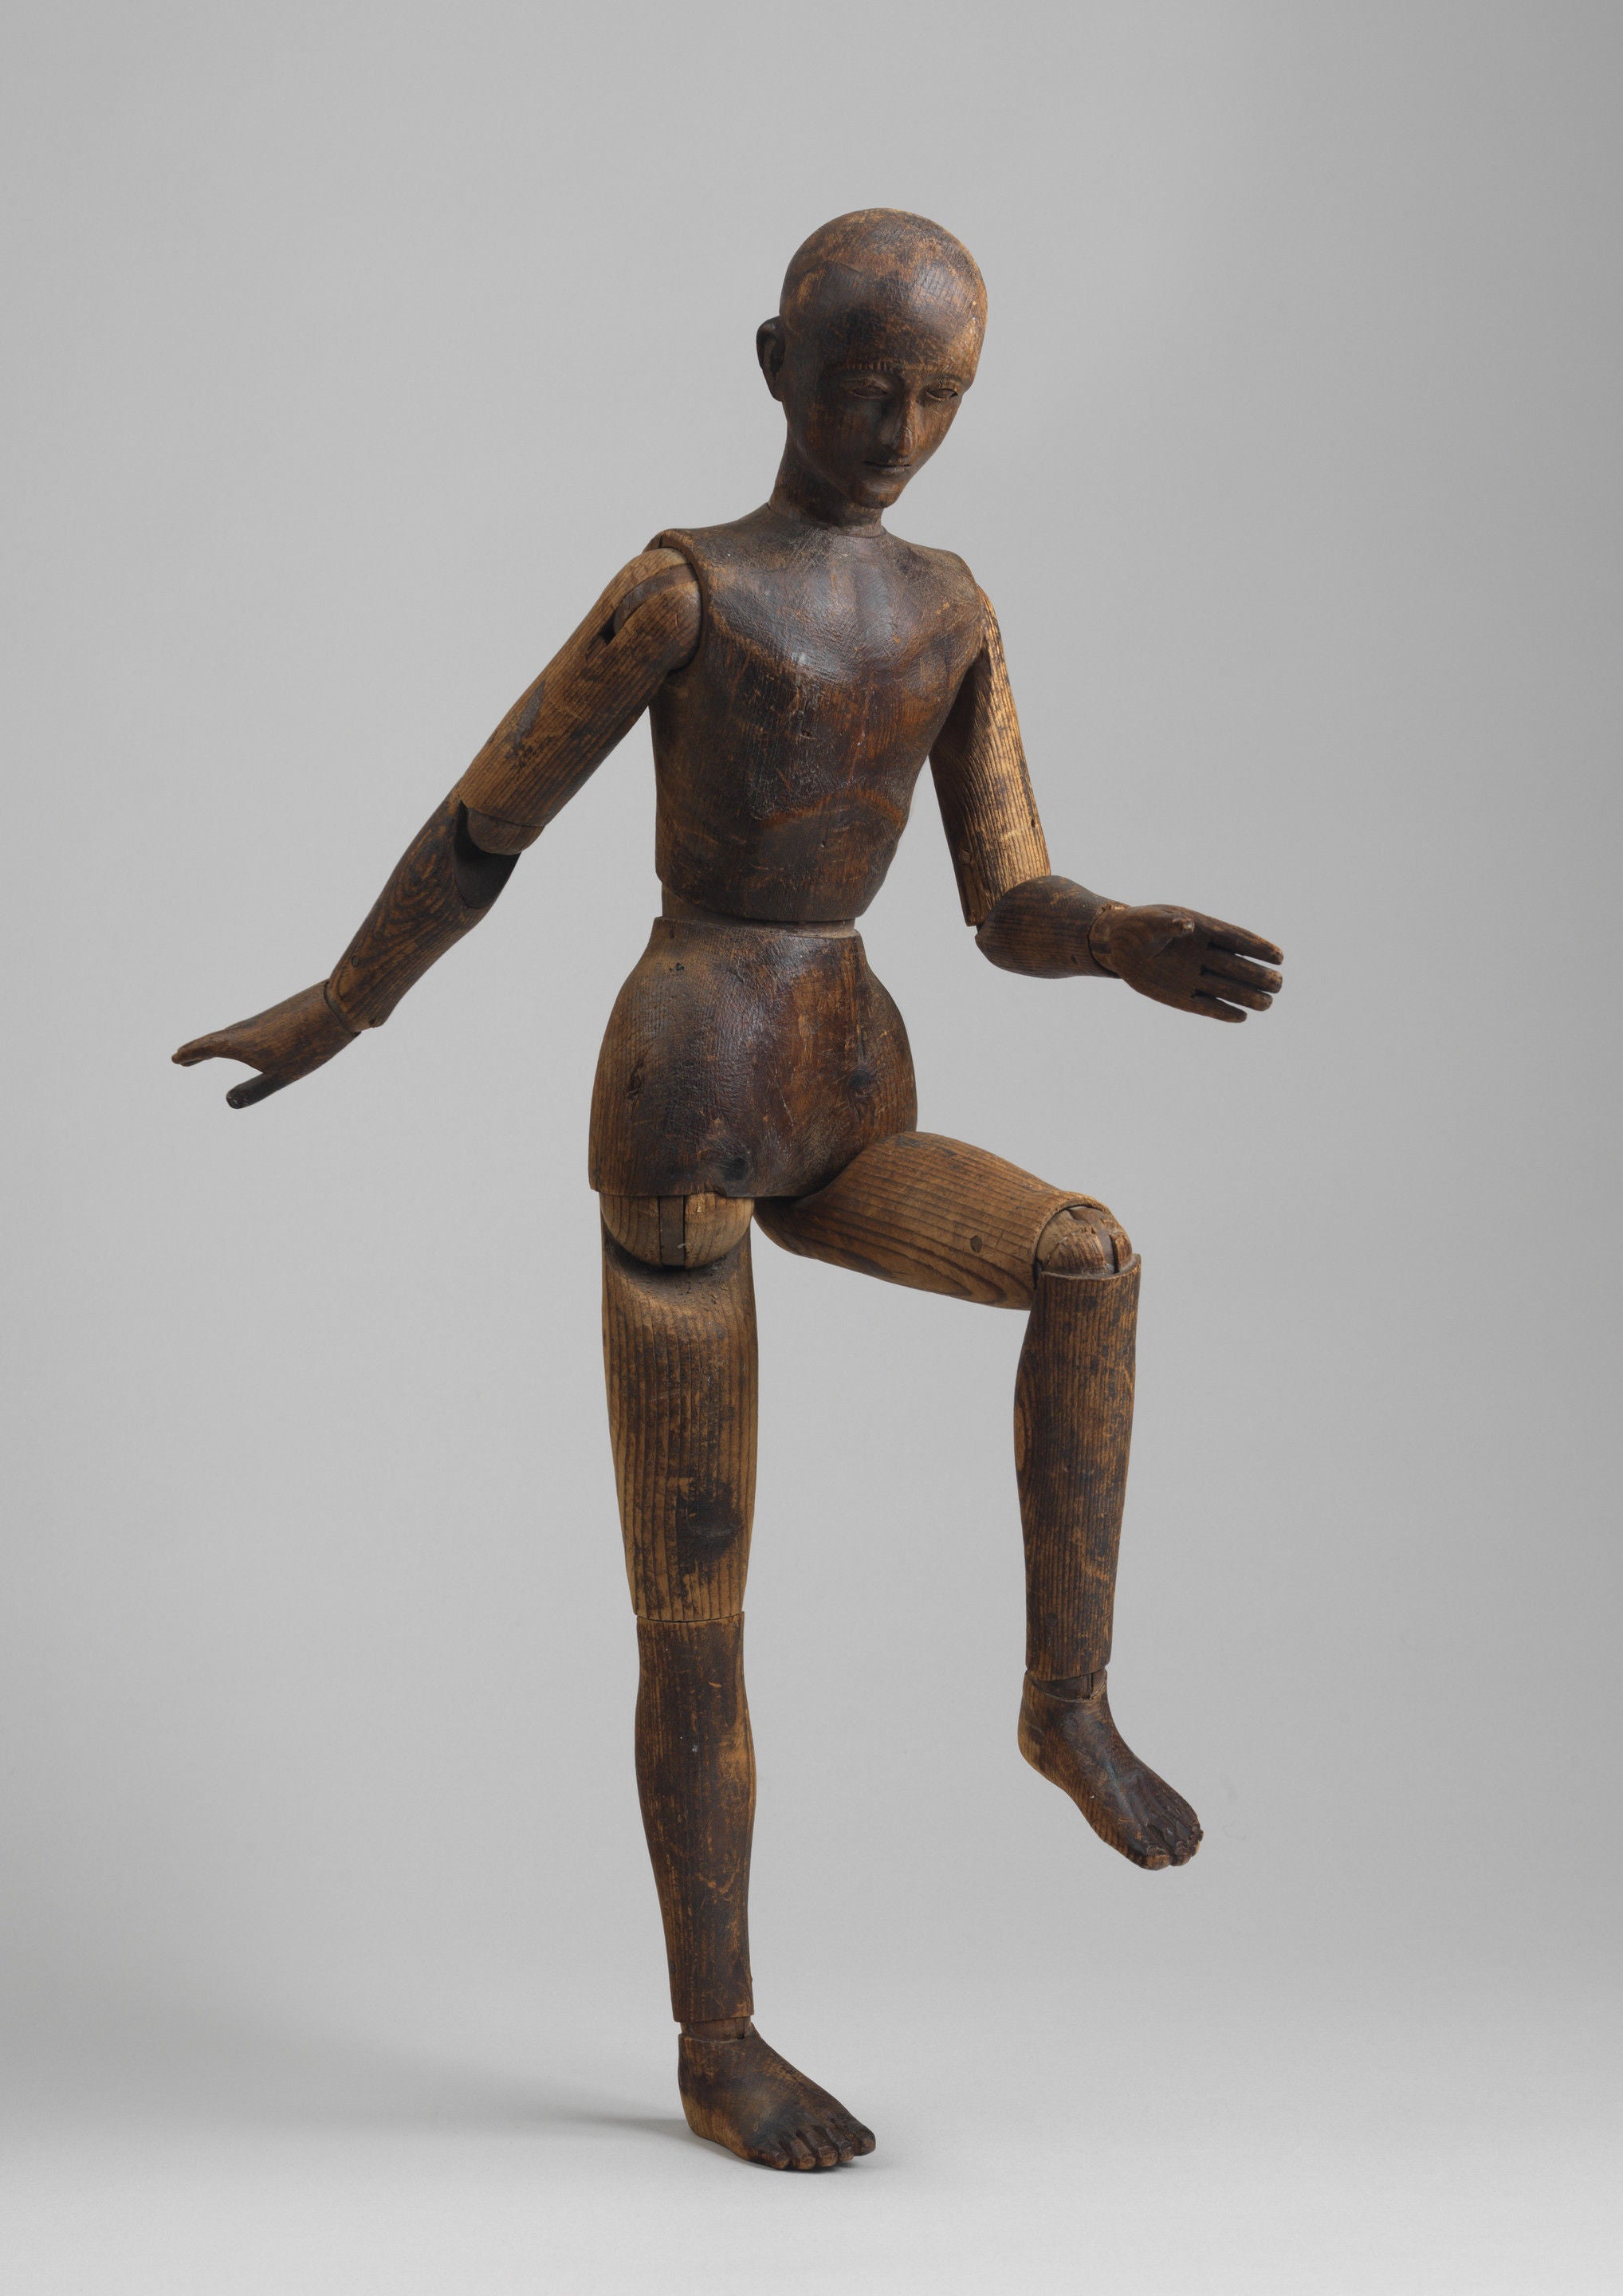 Exceptional Early Artist's Mannequin or Lay Figure